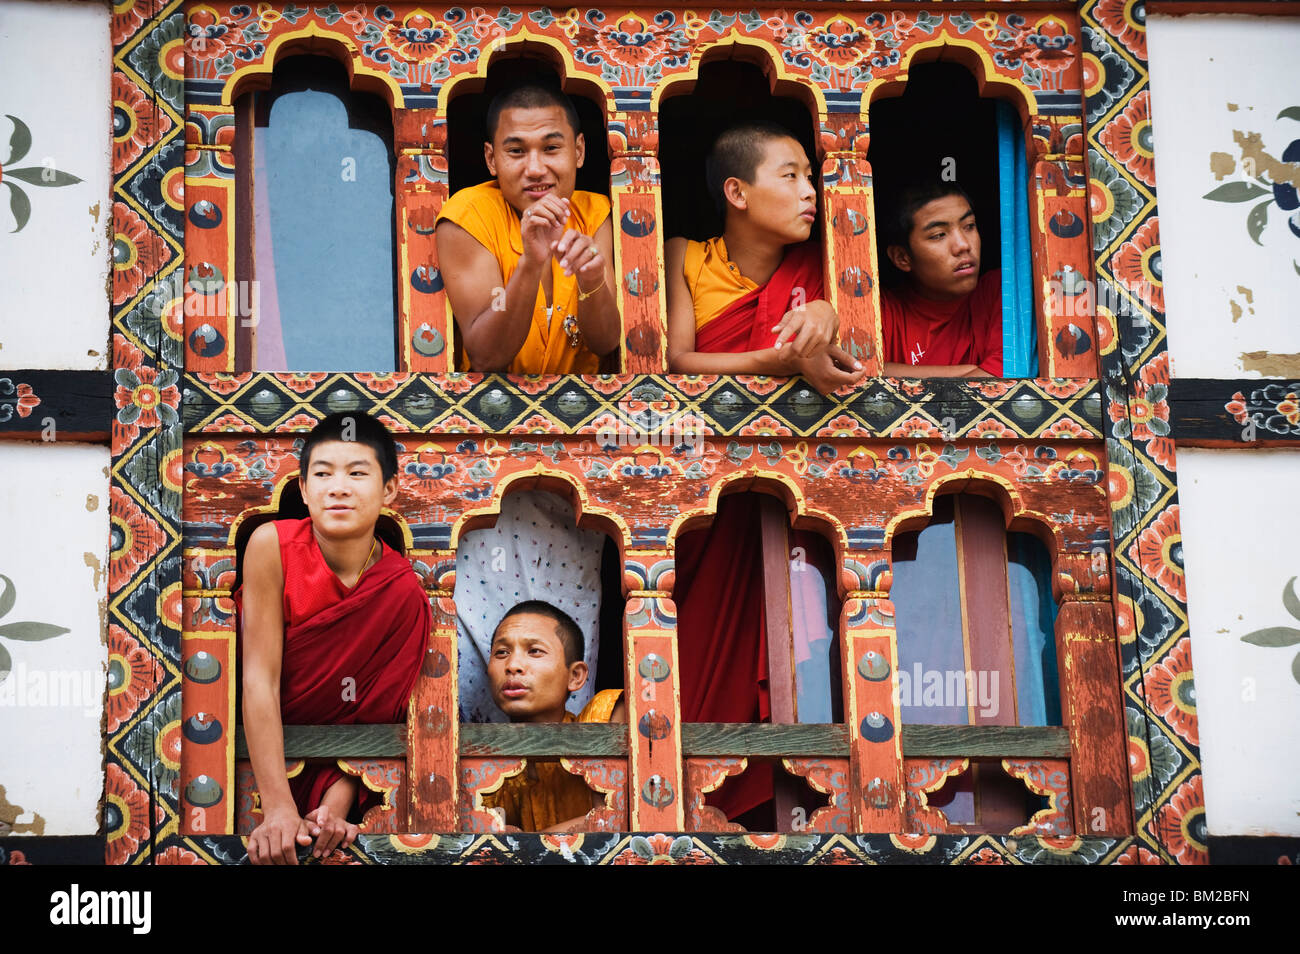 Young monks at a window, Chimi Lhakhang dating from 1499, Temple of the Divine Madman Lama Drukpa Kunley, Punakha, Bhutan Stock Photo